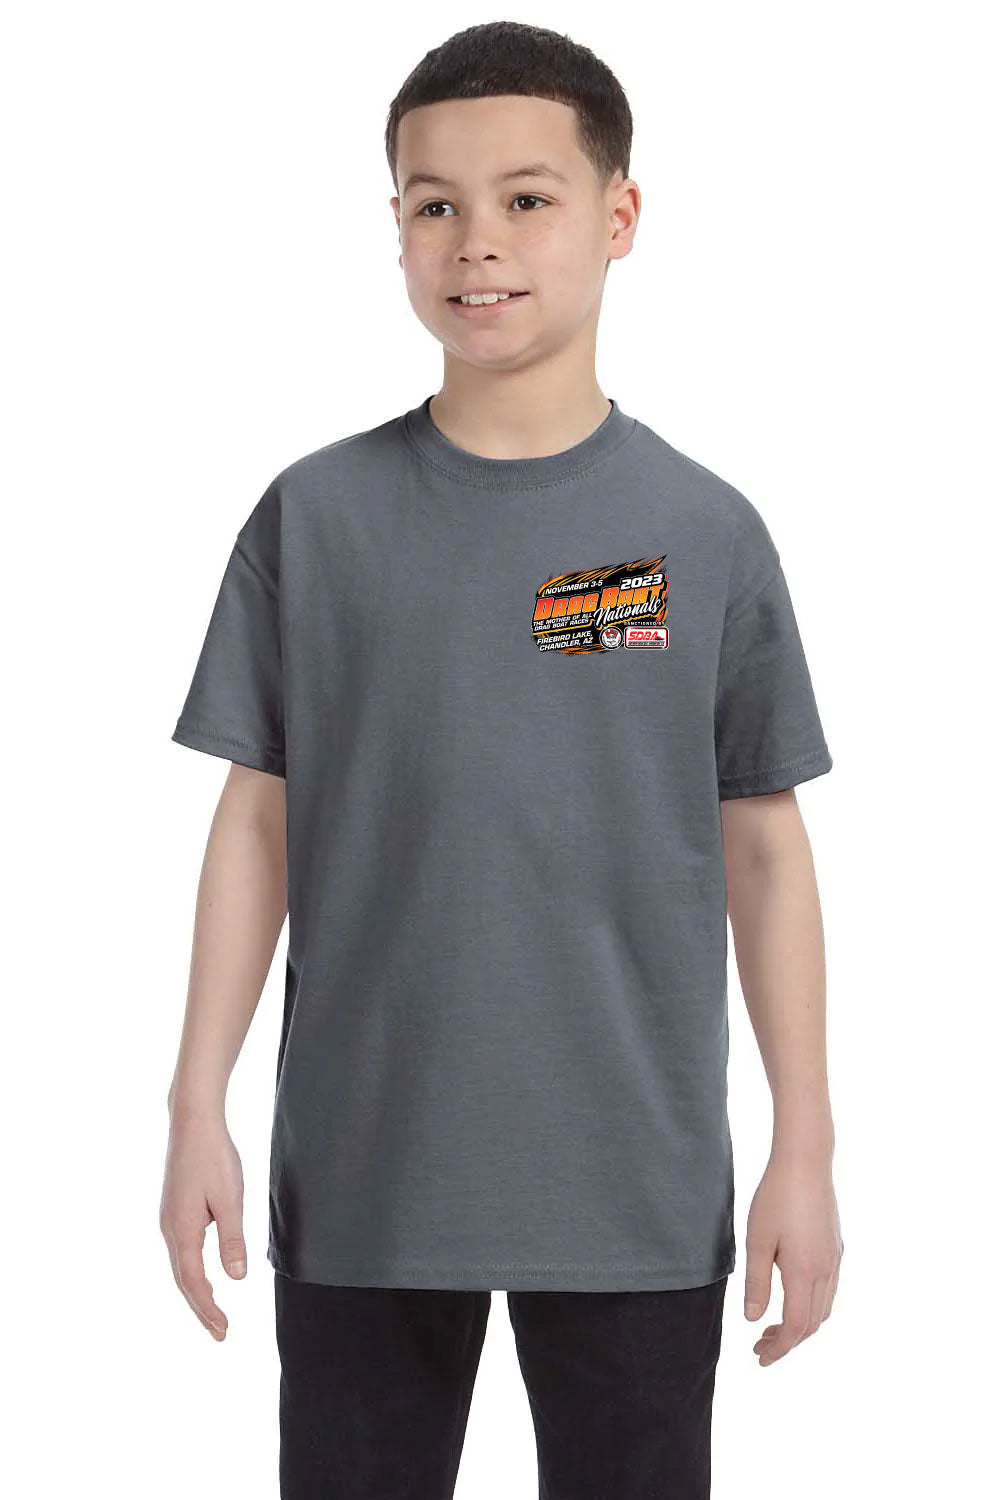 2023 Drag Boat Nationals Event Youth T-Shirt